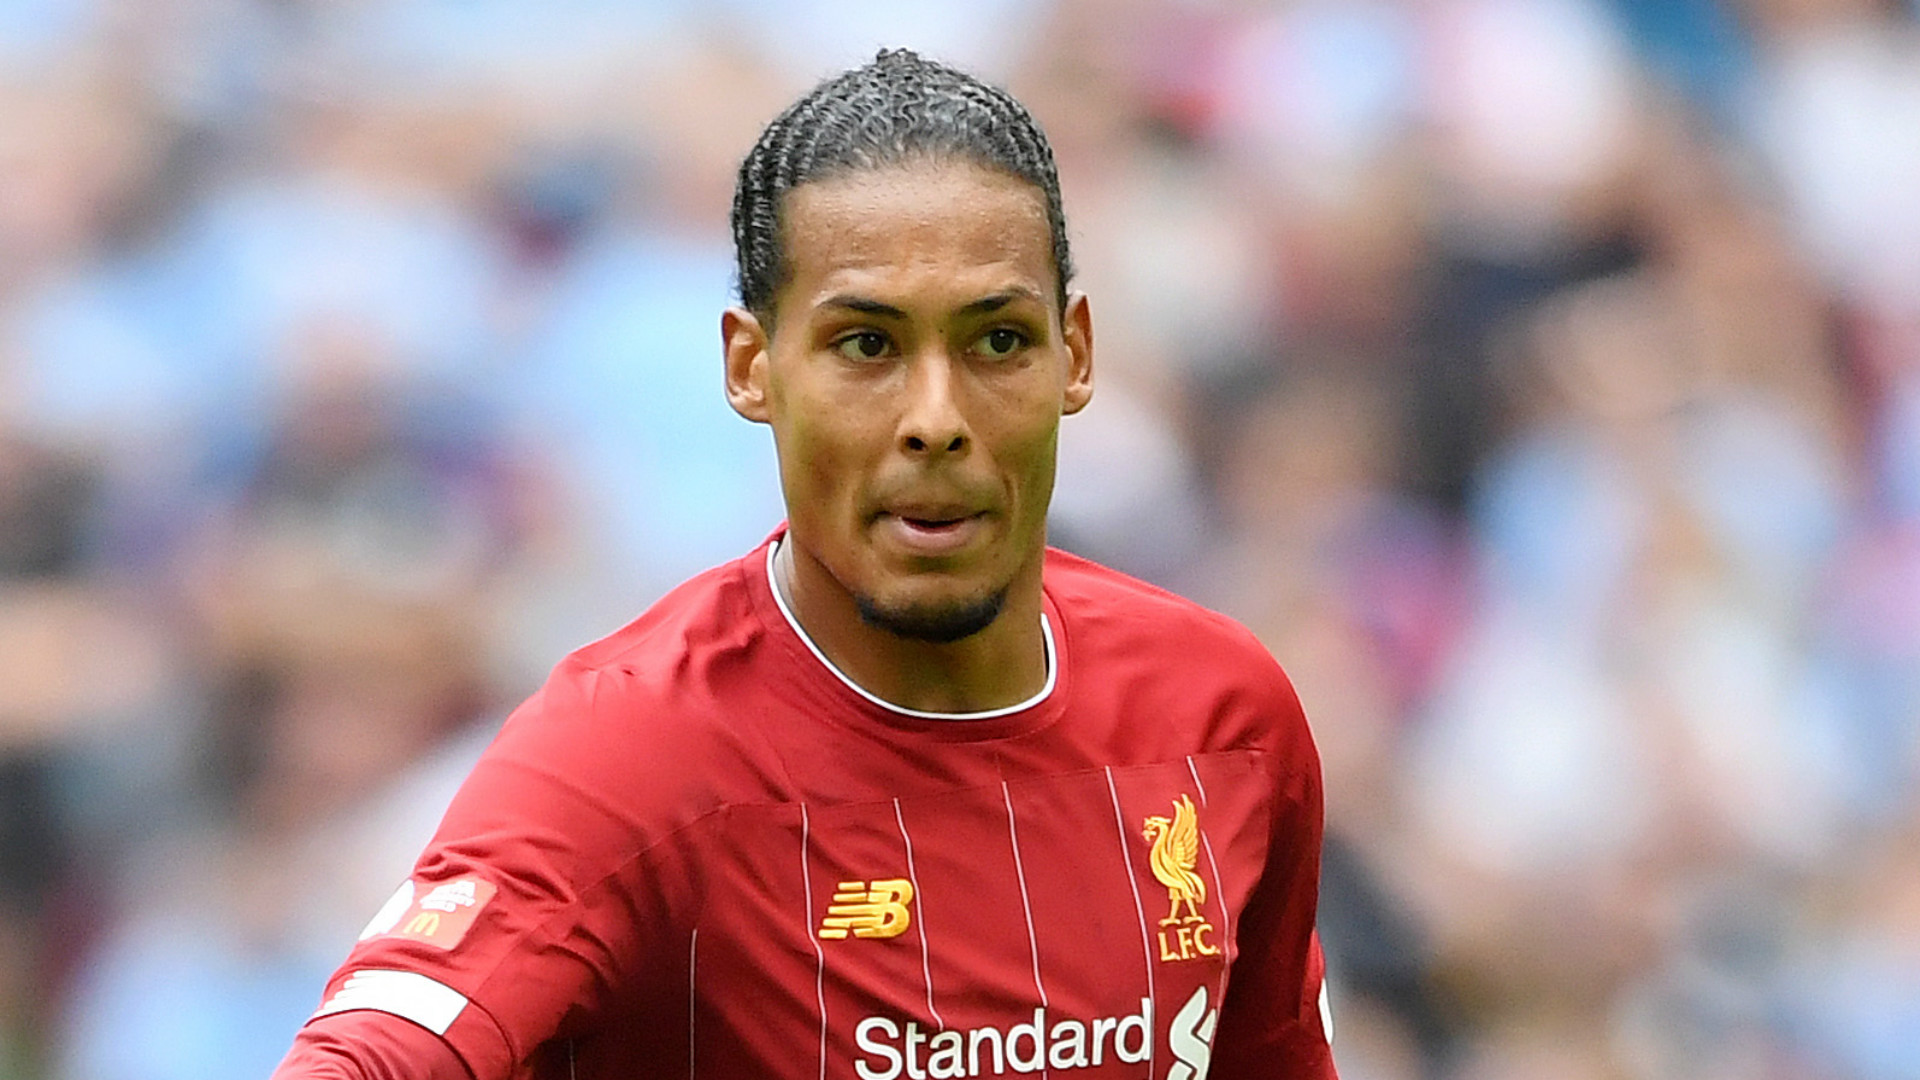 Liverpool news: Virgil van Dijk finally dribbled past as Reds star's epic record ended ...1920 x 1080